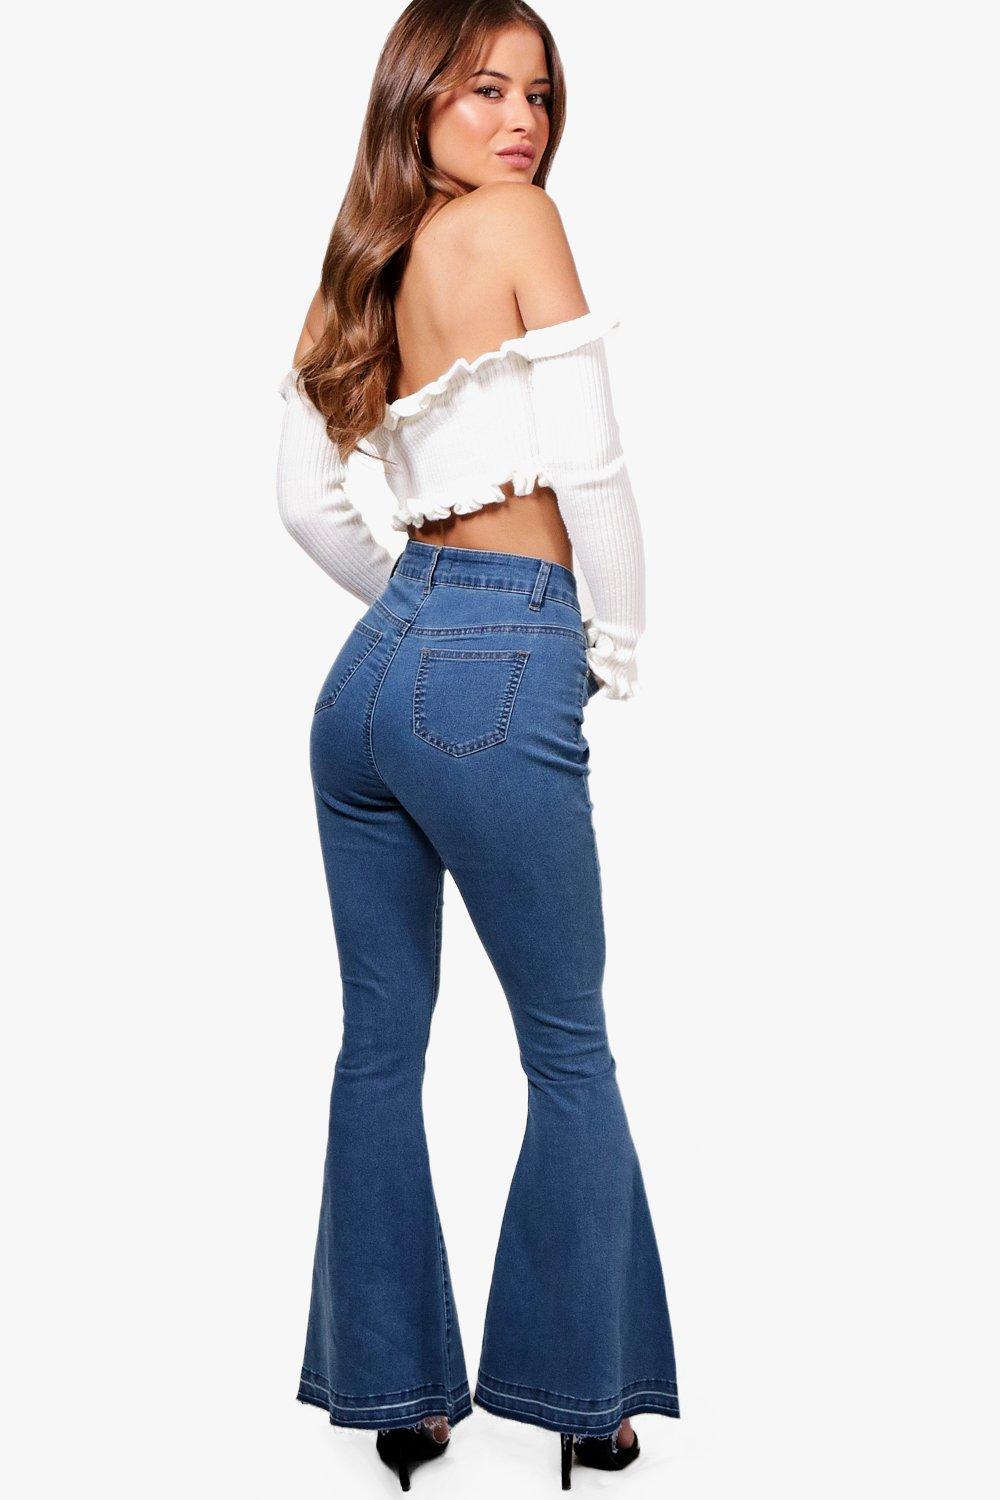 flare jeans petite size